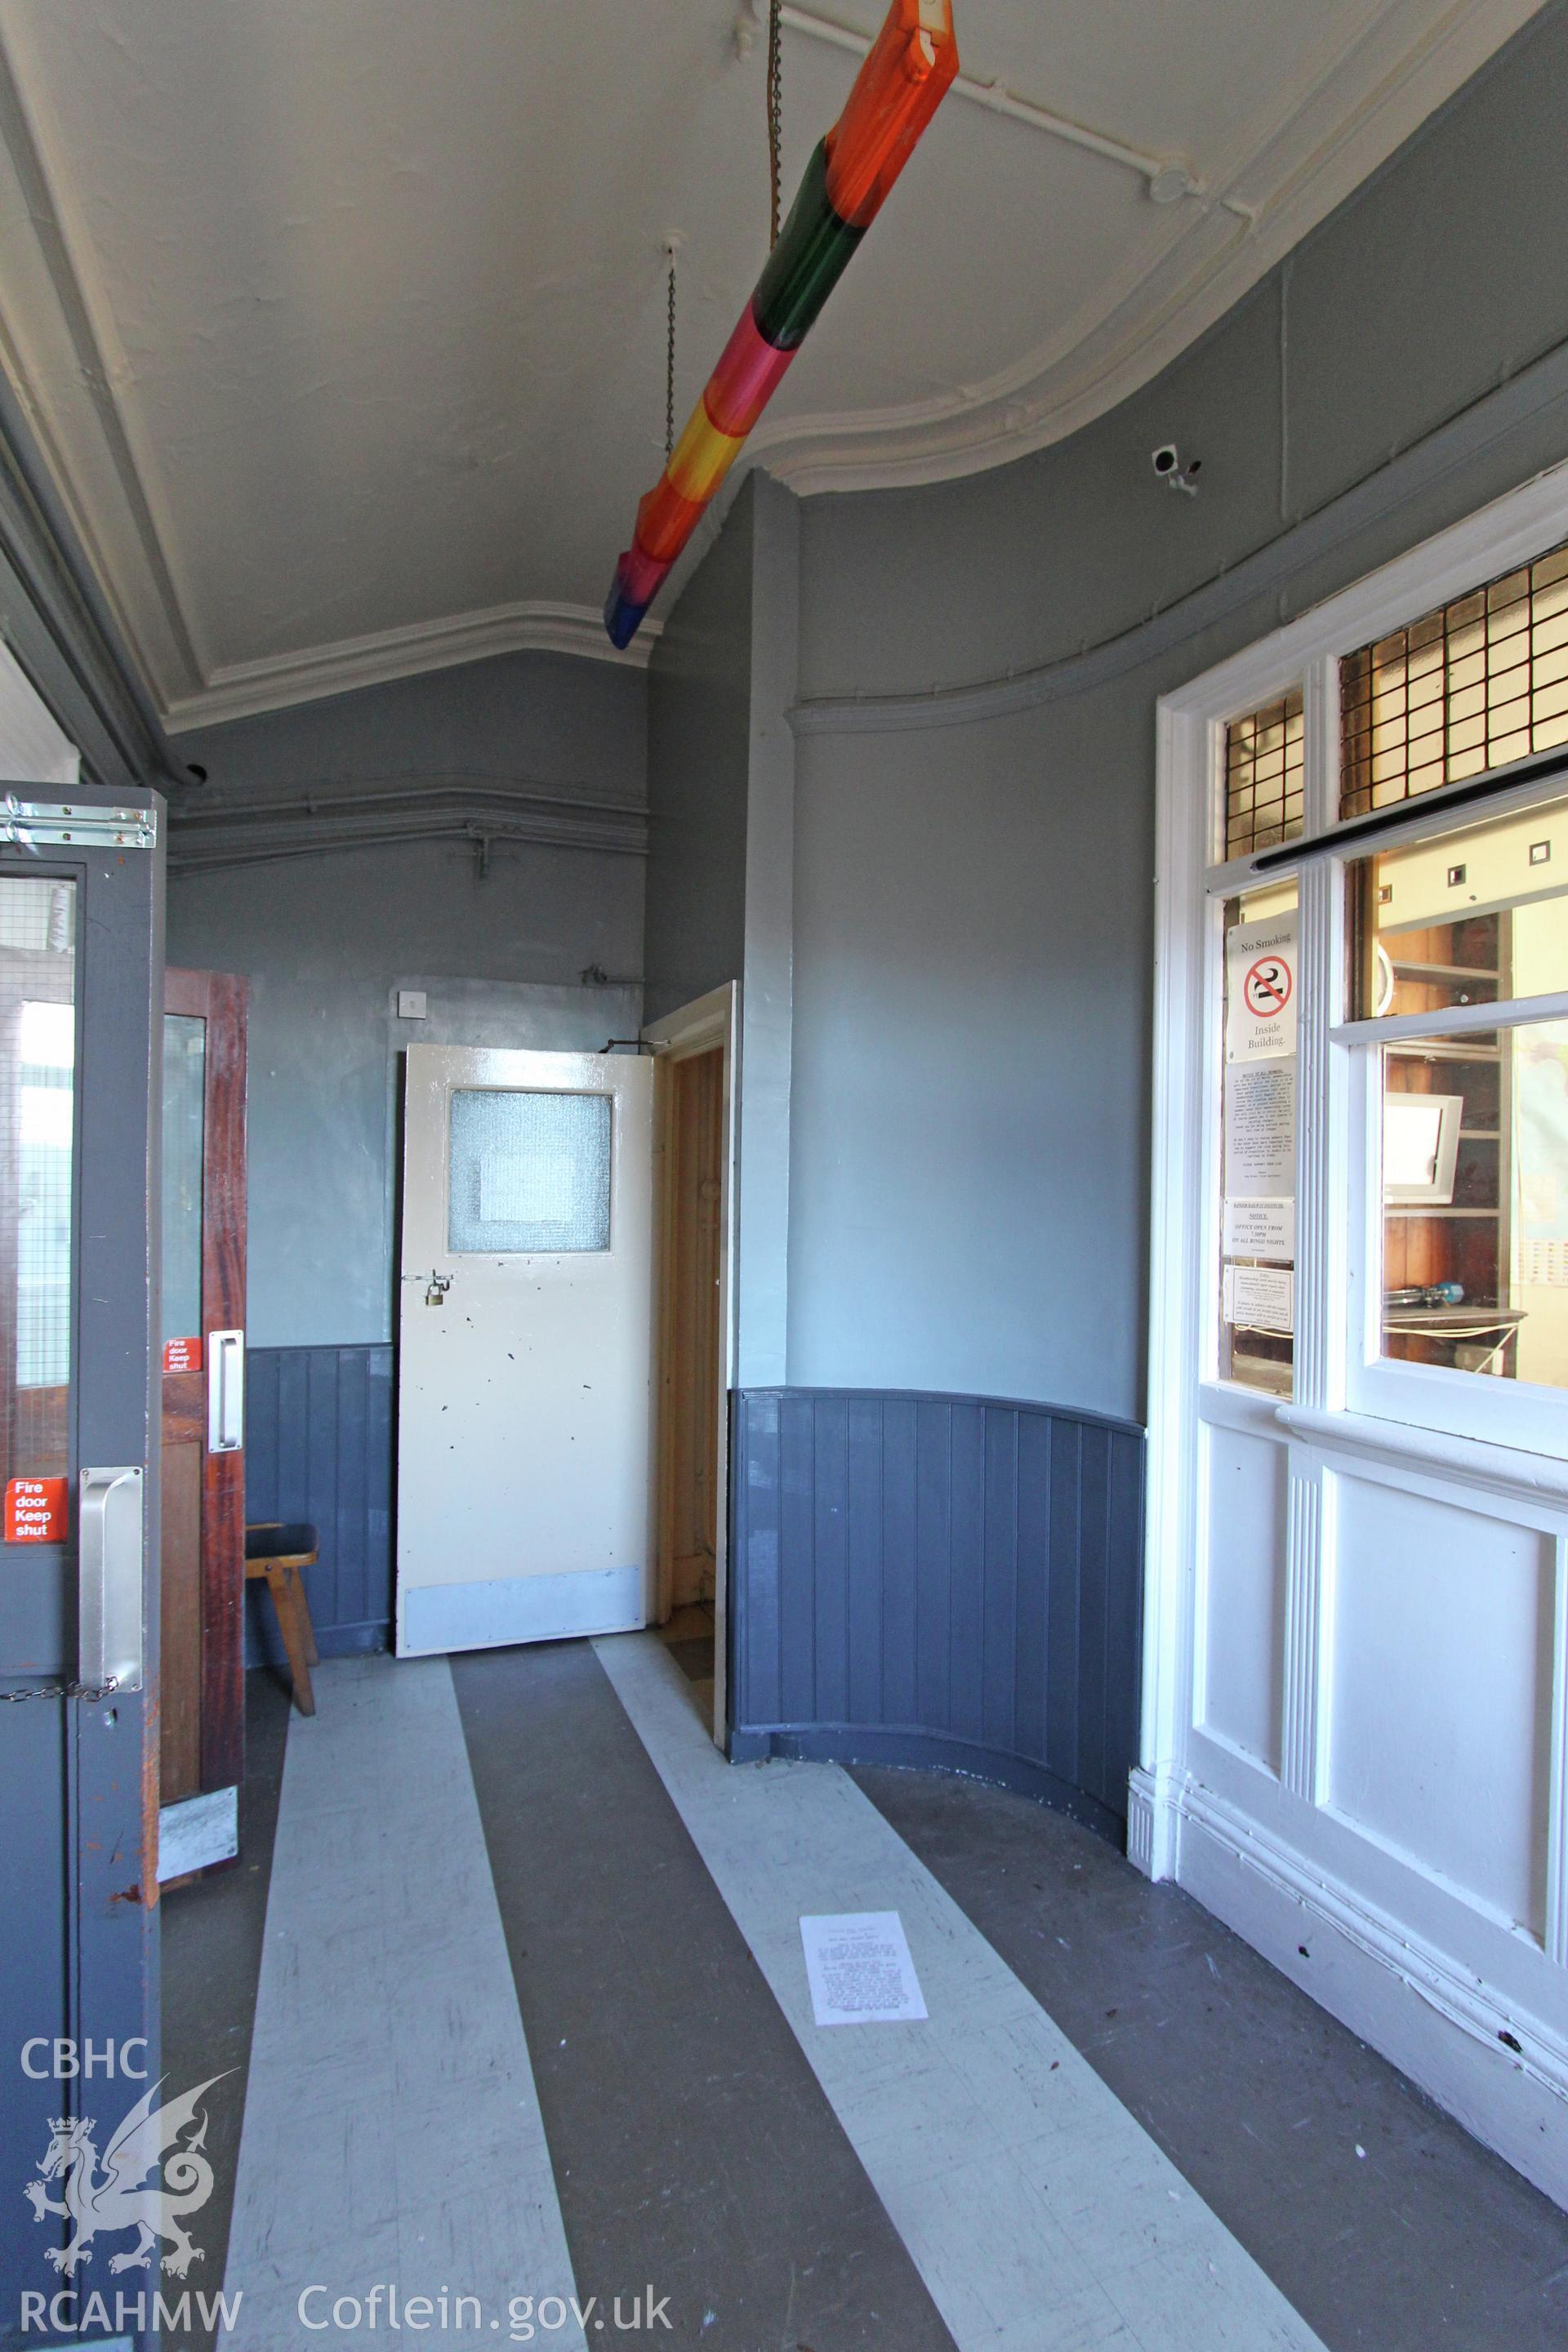 Interior view of the Railway Institute, Bangor. Photographed during survey conducted by Sue Fielding for the RCAHMW on 4th April 2016.